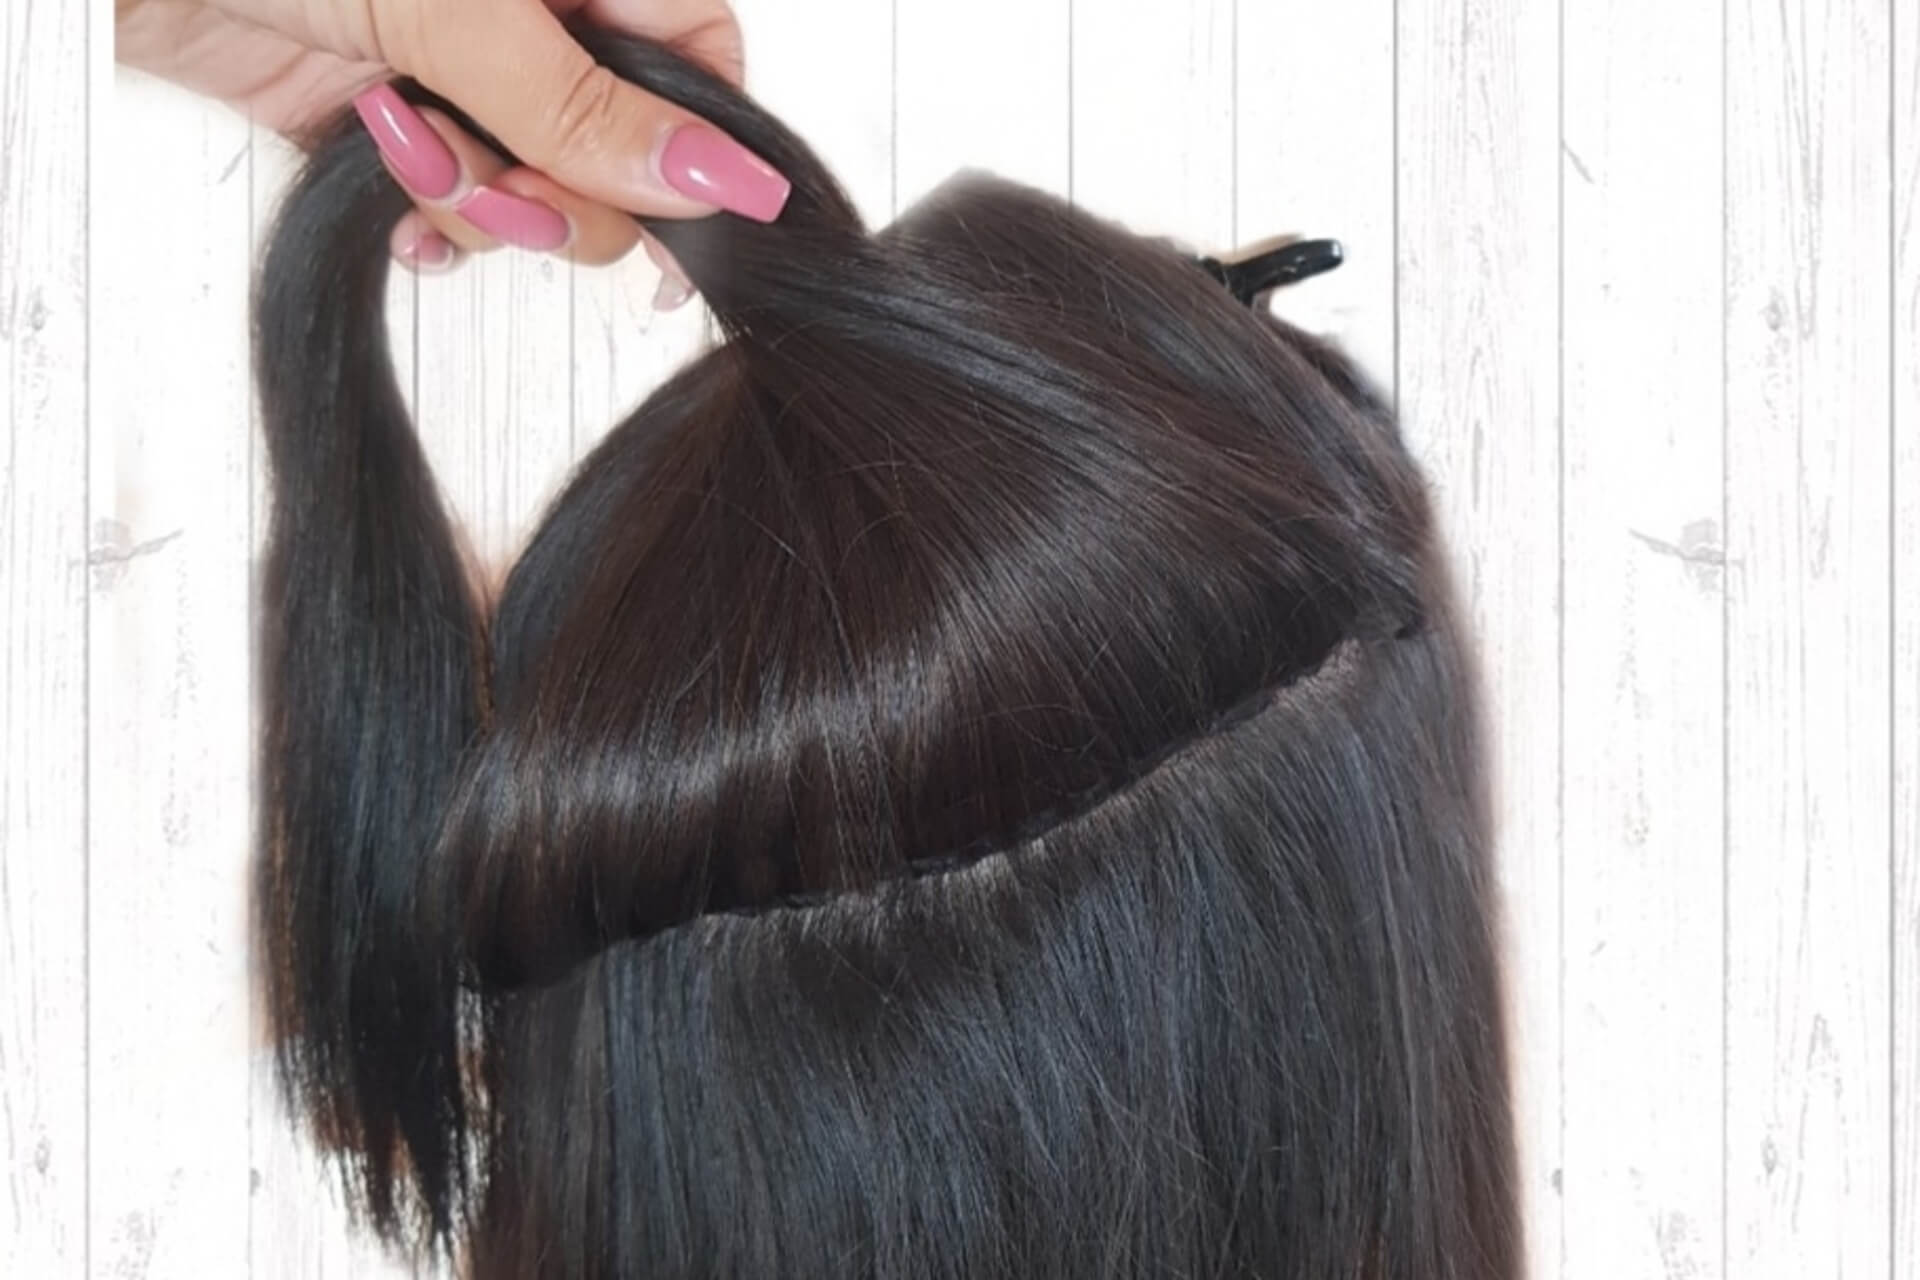 Hair Extensions Complete Training - 4 Methods